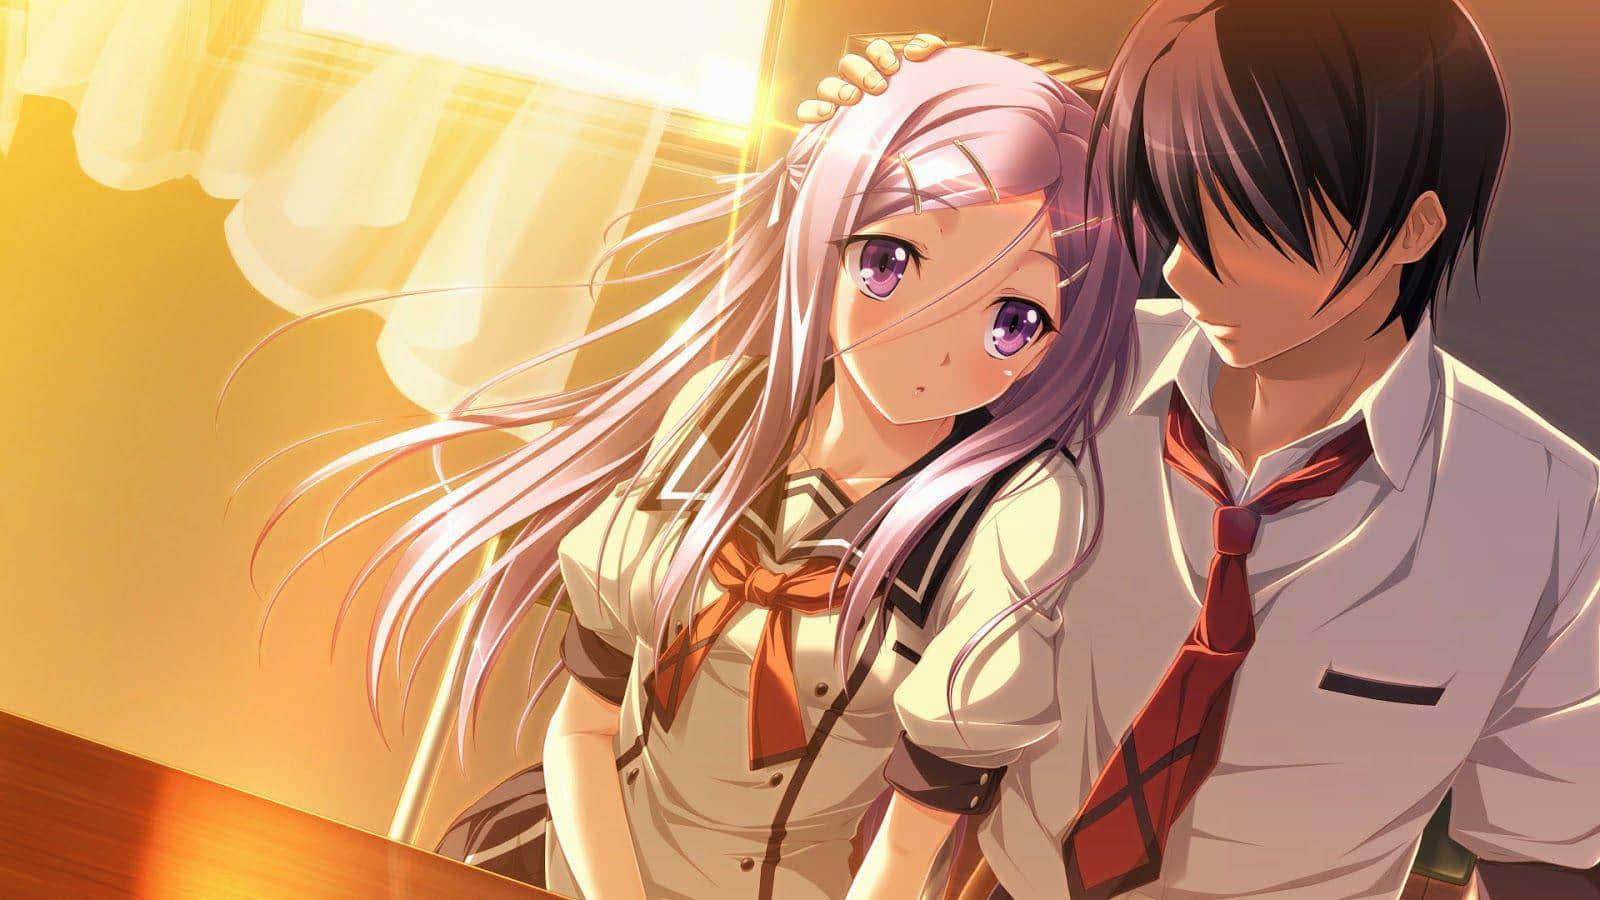 Student Couple With Sunlight Romance Anime Wallpaper